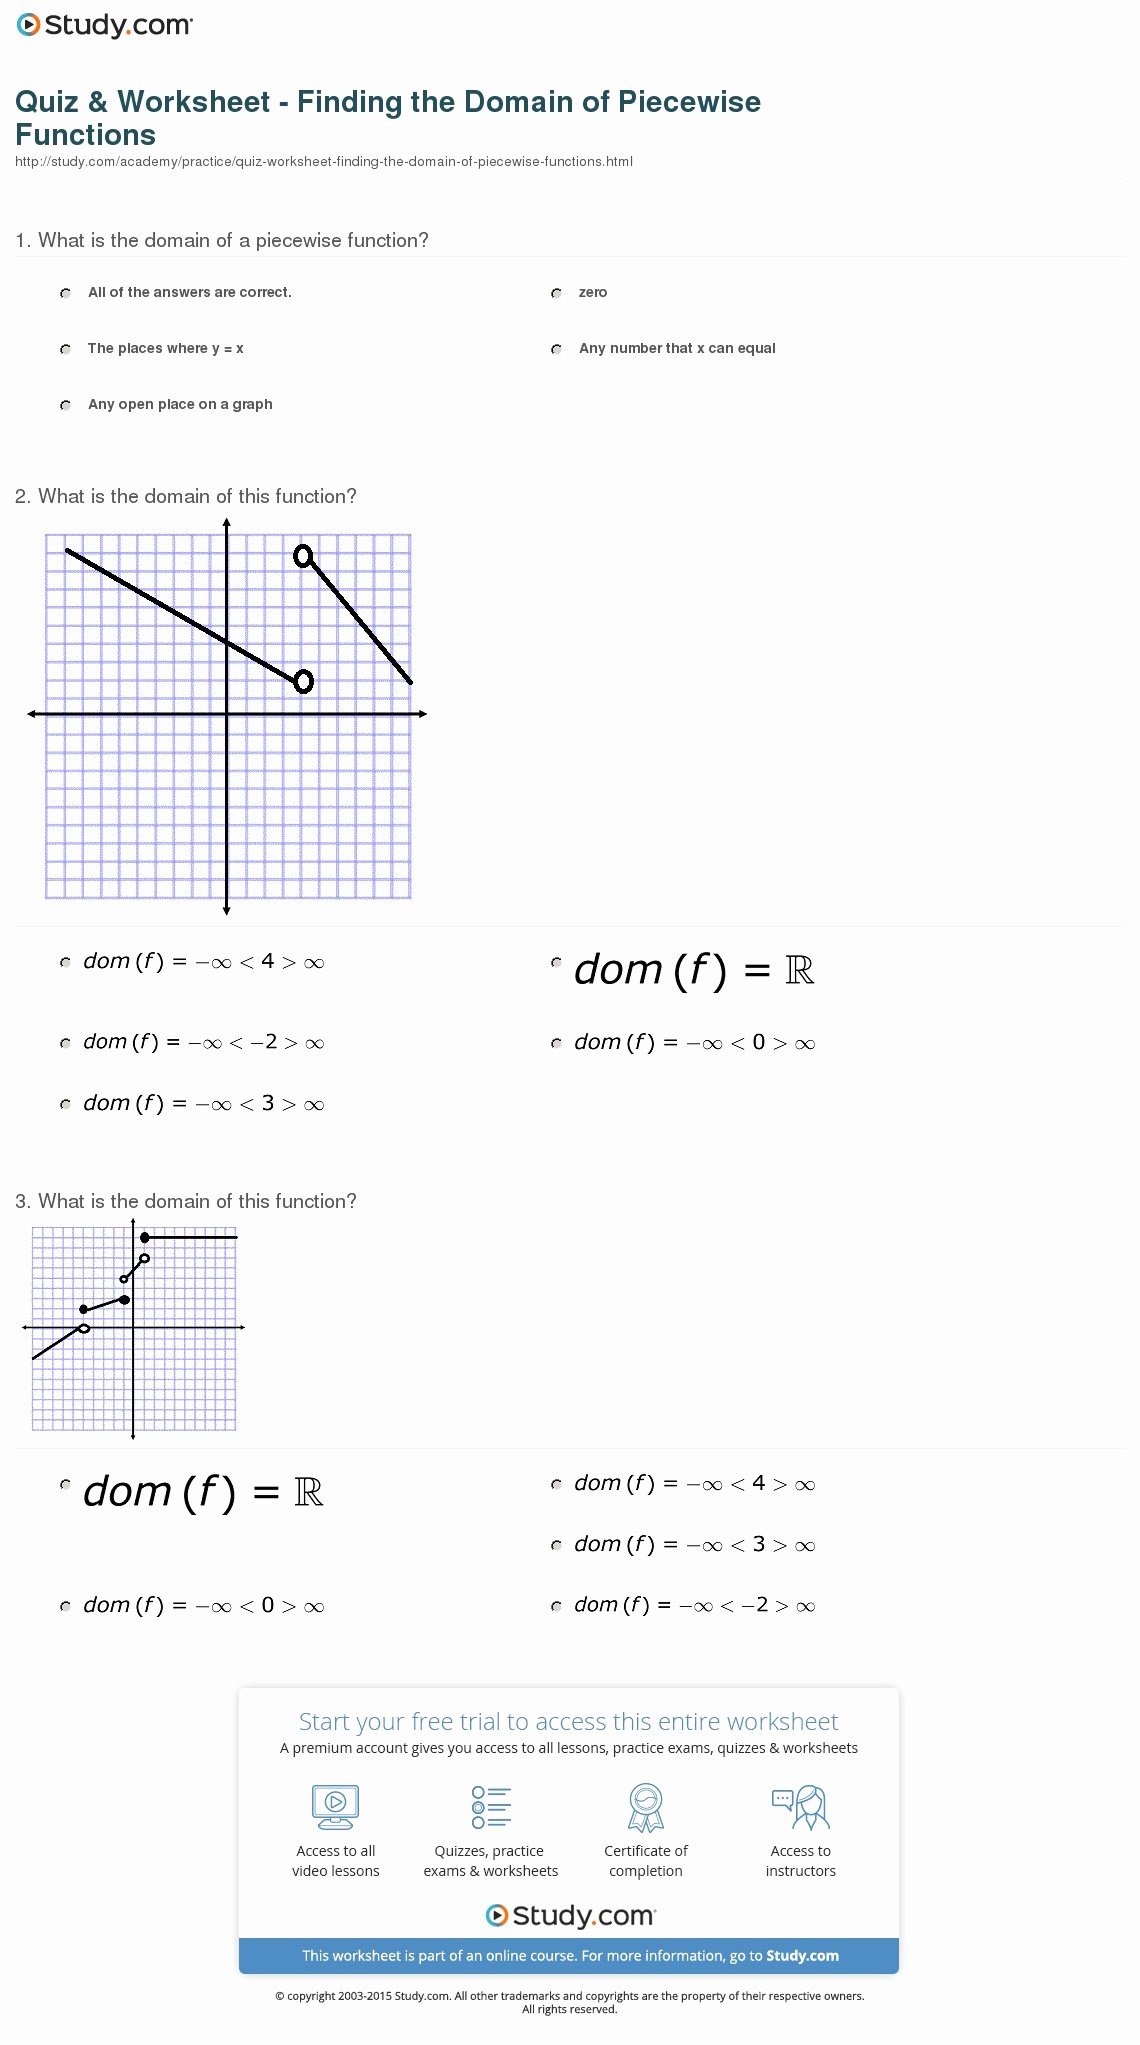 Piecewise Functions Worksheet Answer Key Awesome Quiz &amp; Worksheet Finding the Domain Of Piecewise